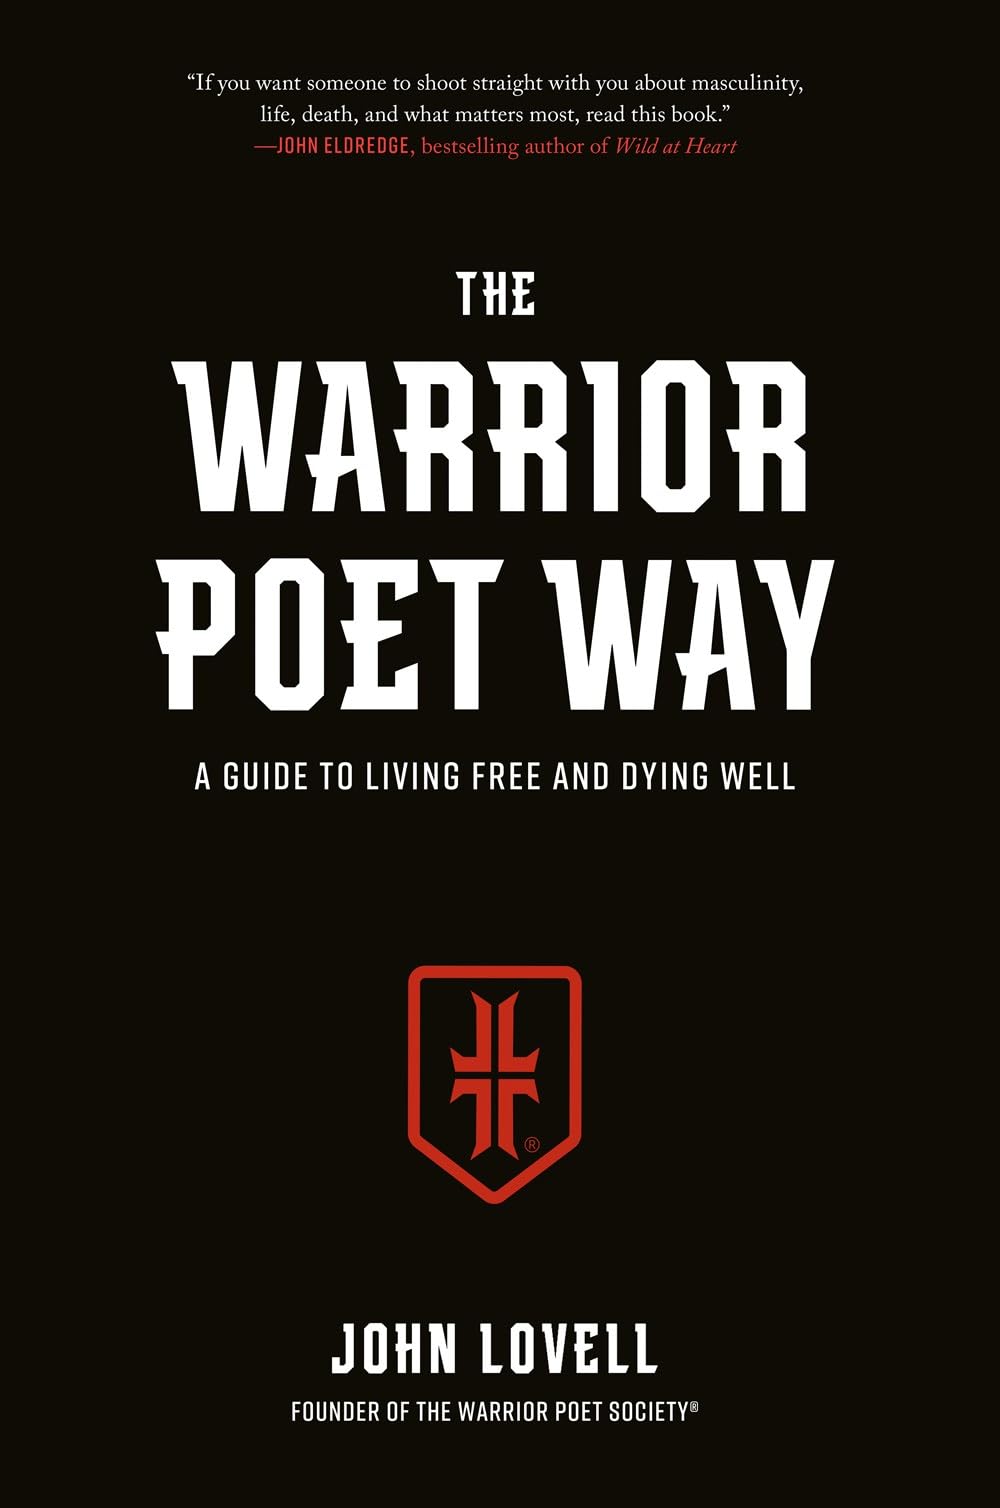 The Warrior Poet Way: A Guide to Living Free and Dying Well by Lovell, John